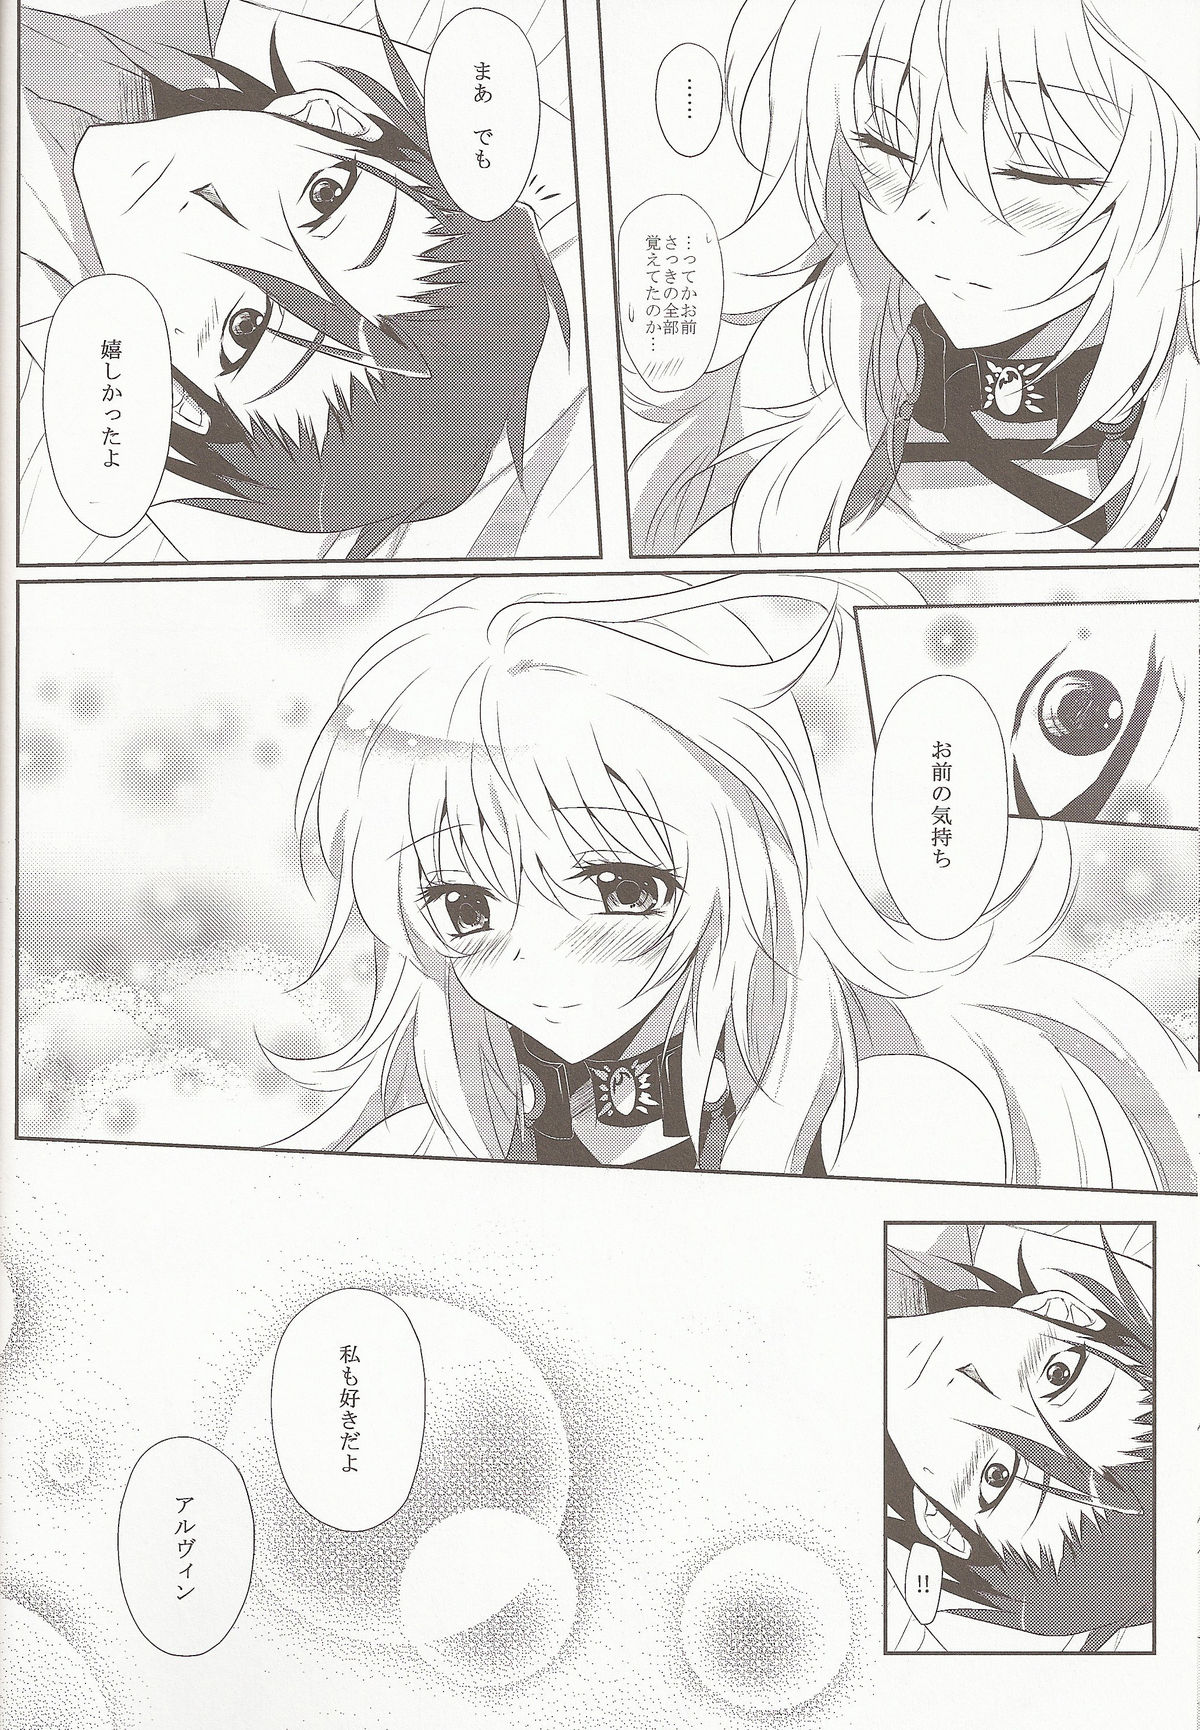 (C81) [Petica (Mikamikan)] External Link (Tales of Xillia) page 36 full